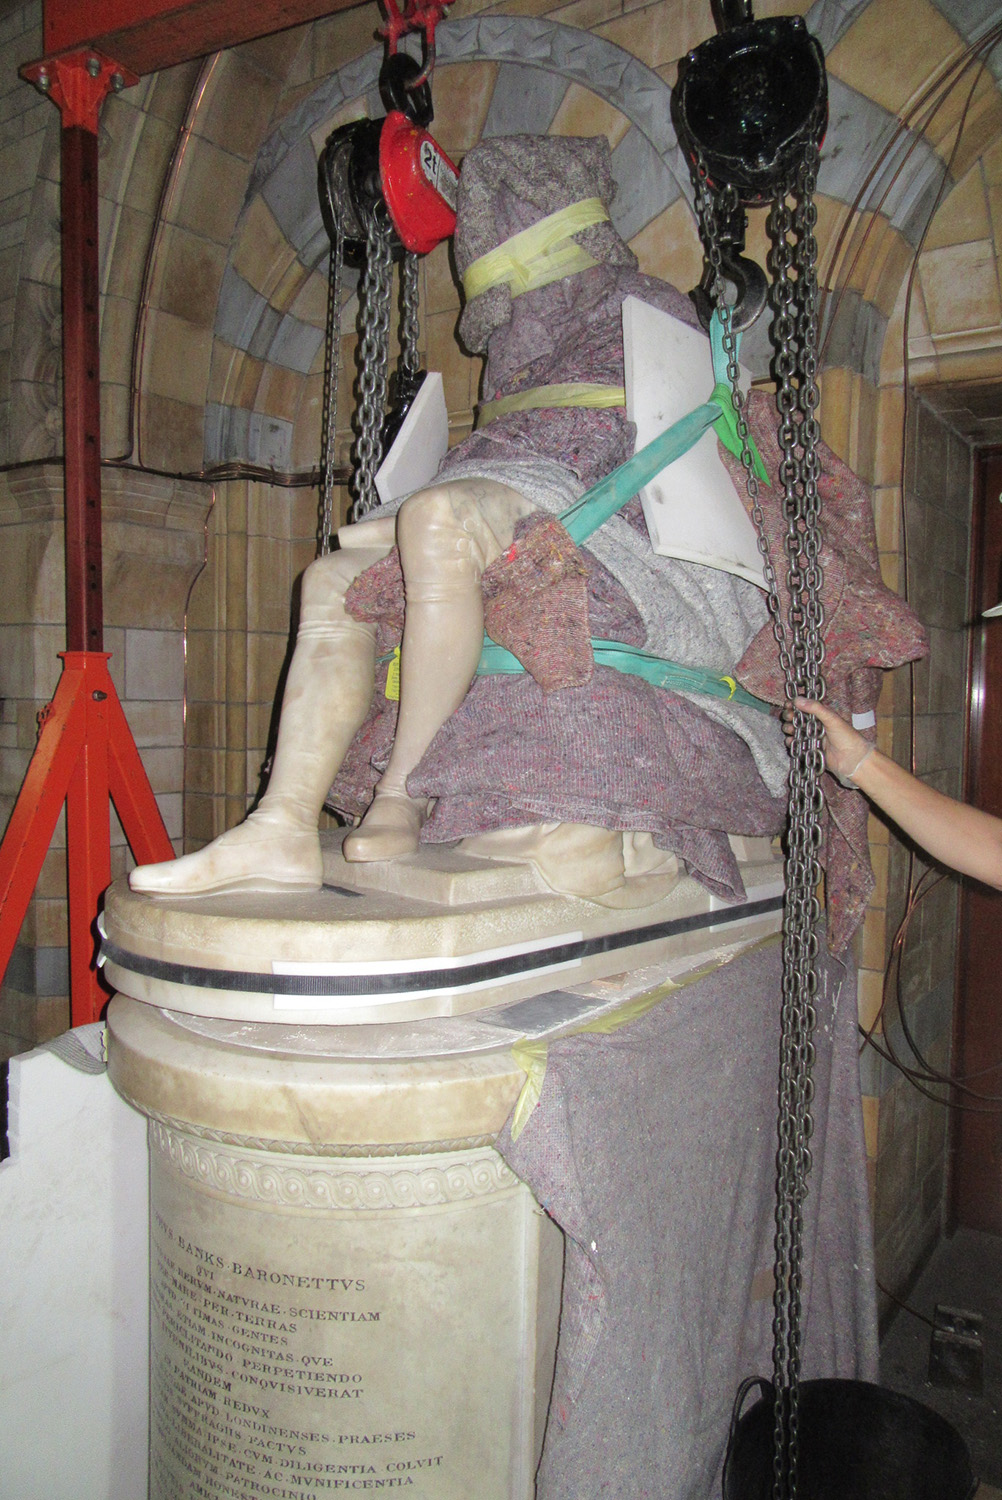 A stone statue of a seated figure covered in blankets and foam padding is lifted by two winches.